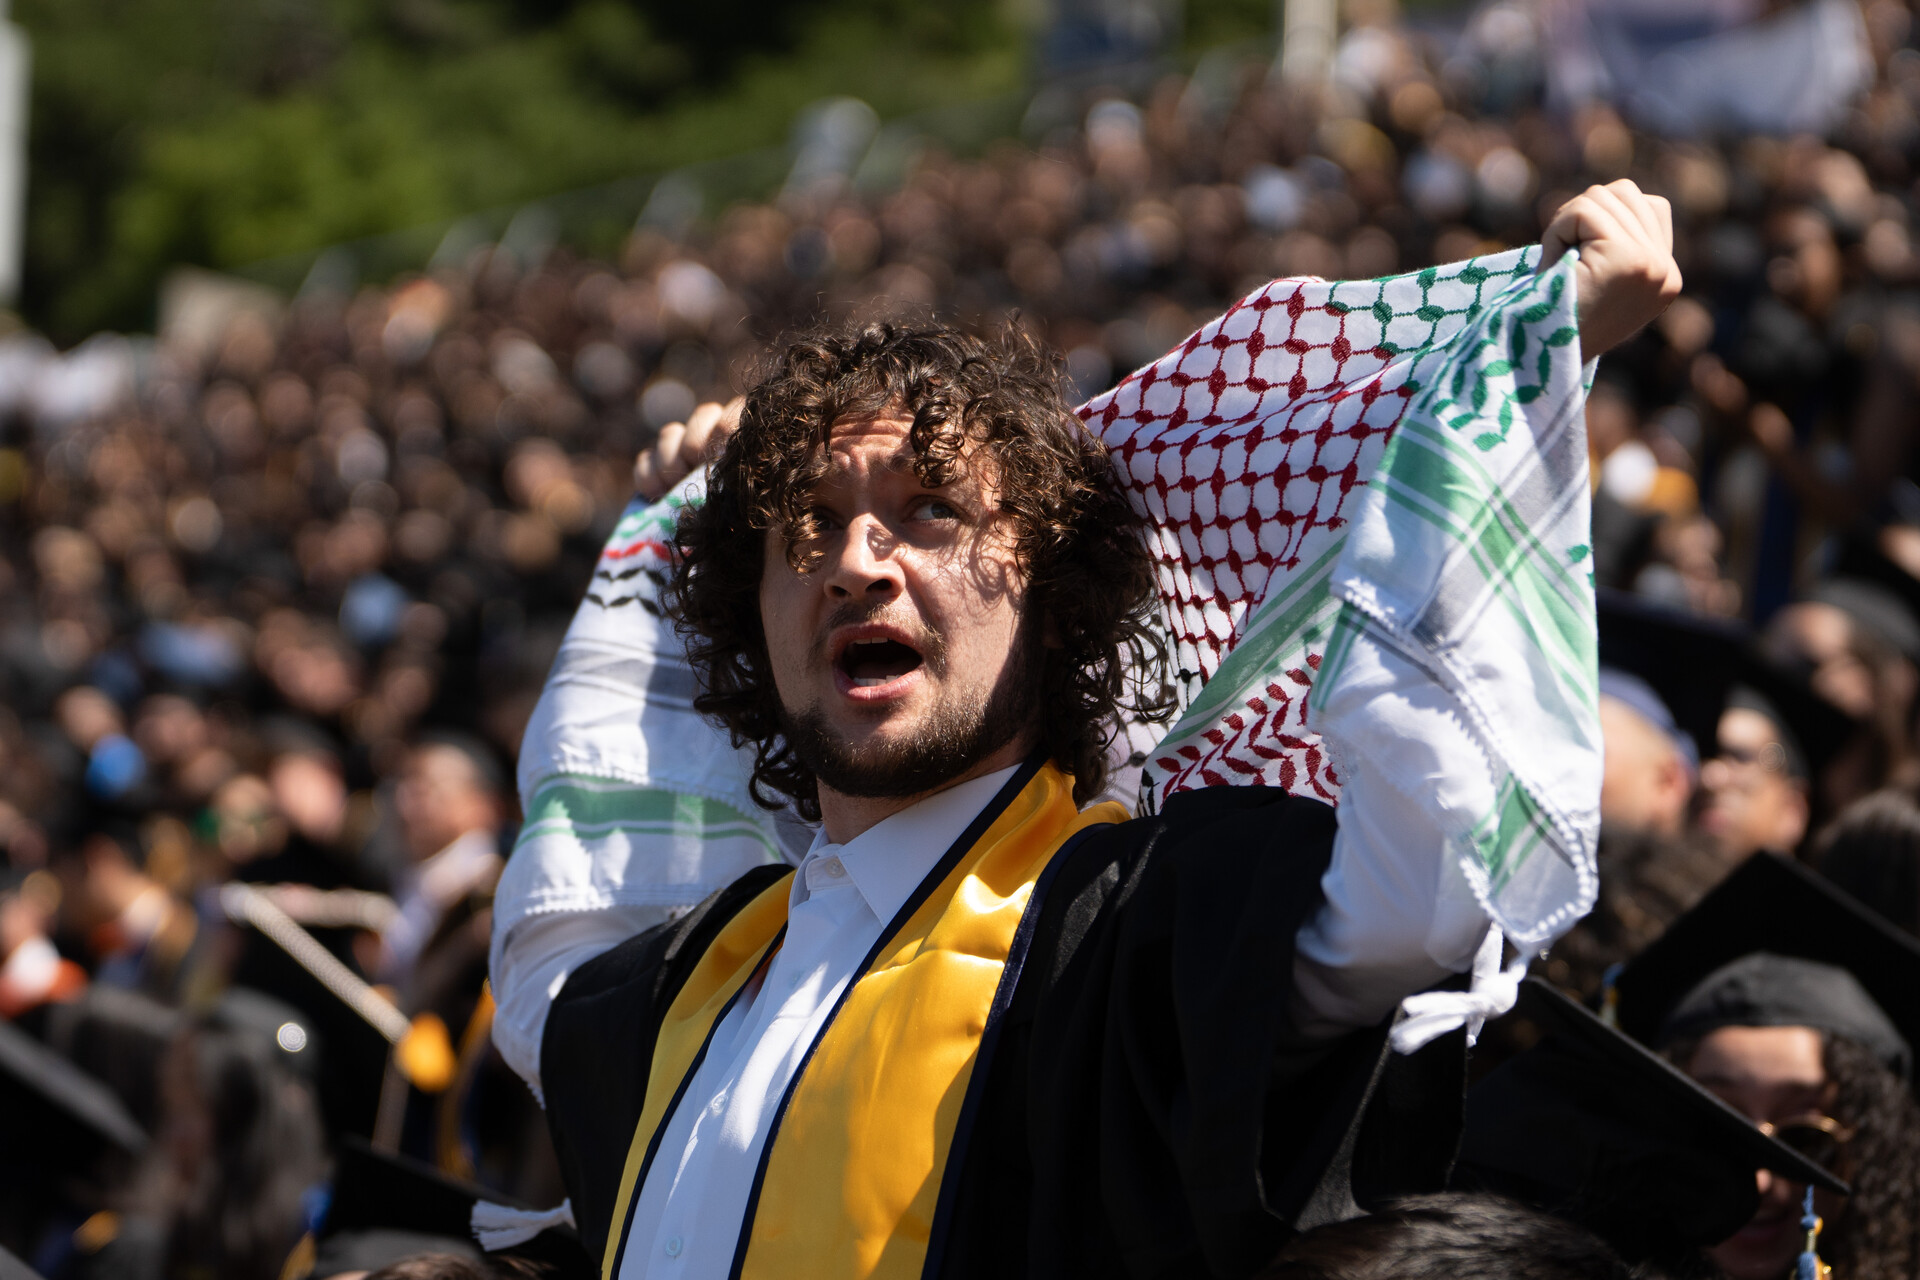 A young man wearing a graduation gown holds a keffiyeh over his head with a crowd of other students in academic regalia behind him.